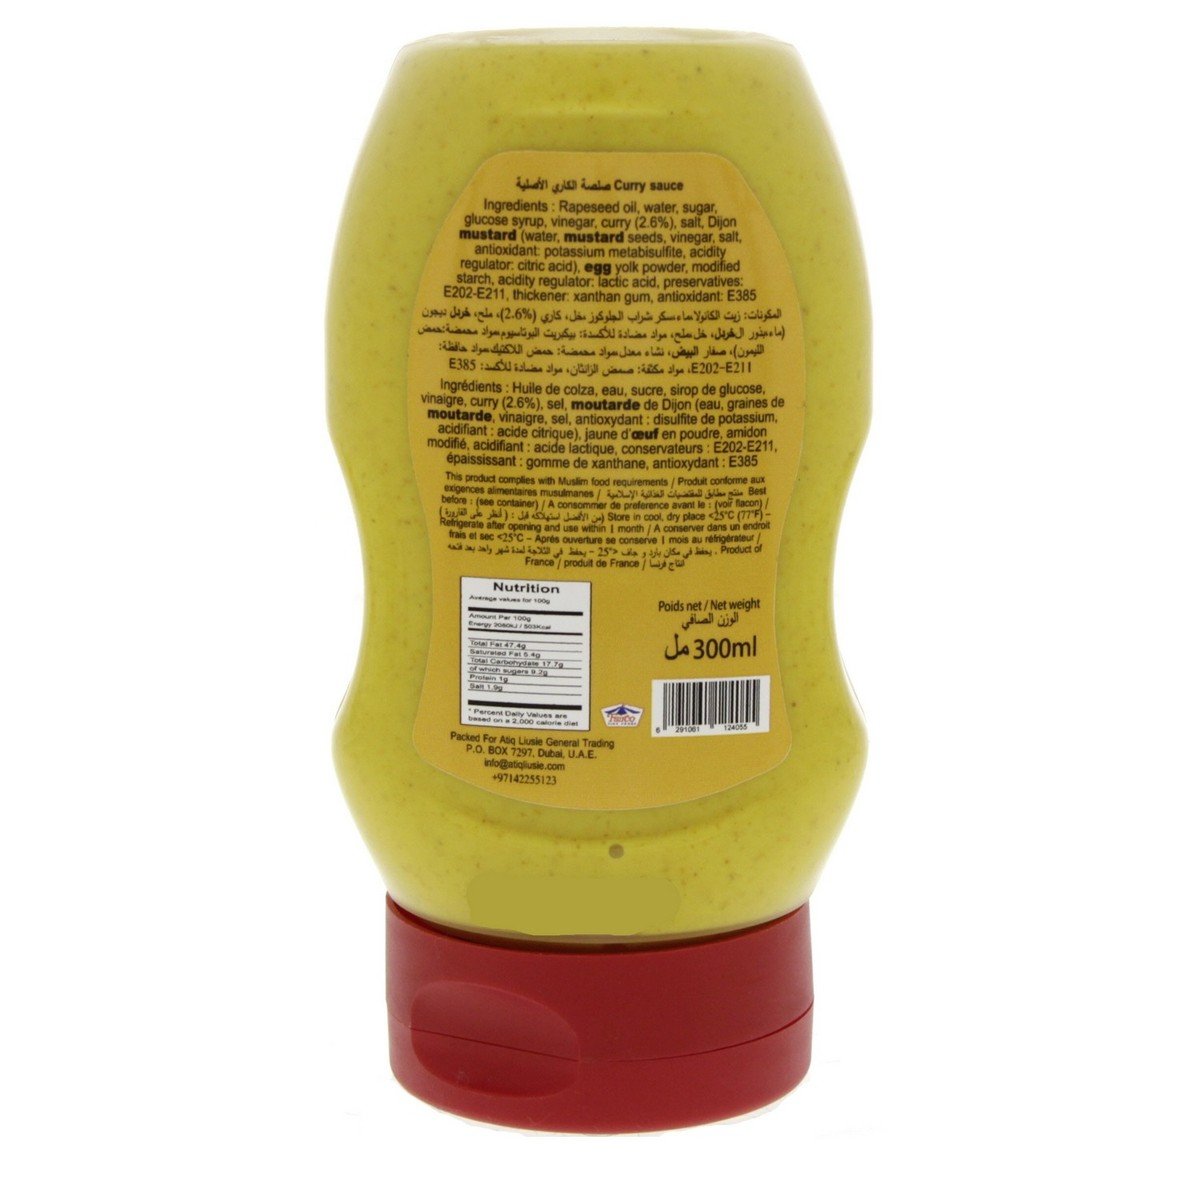 Ethnic Excellence Curry Sauce 300 ml